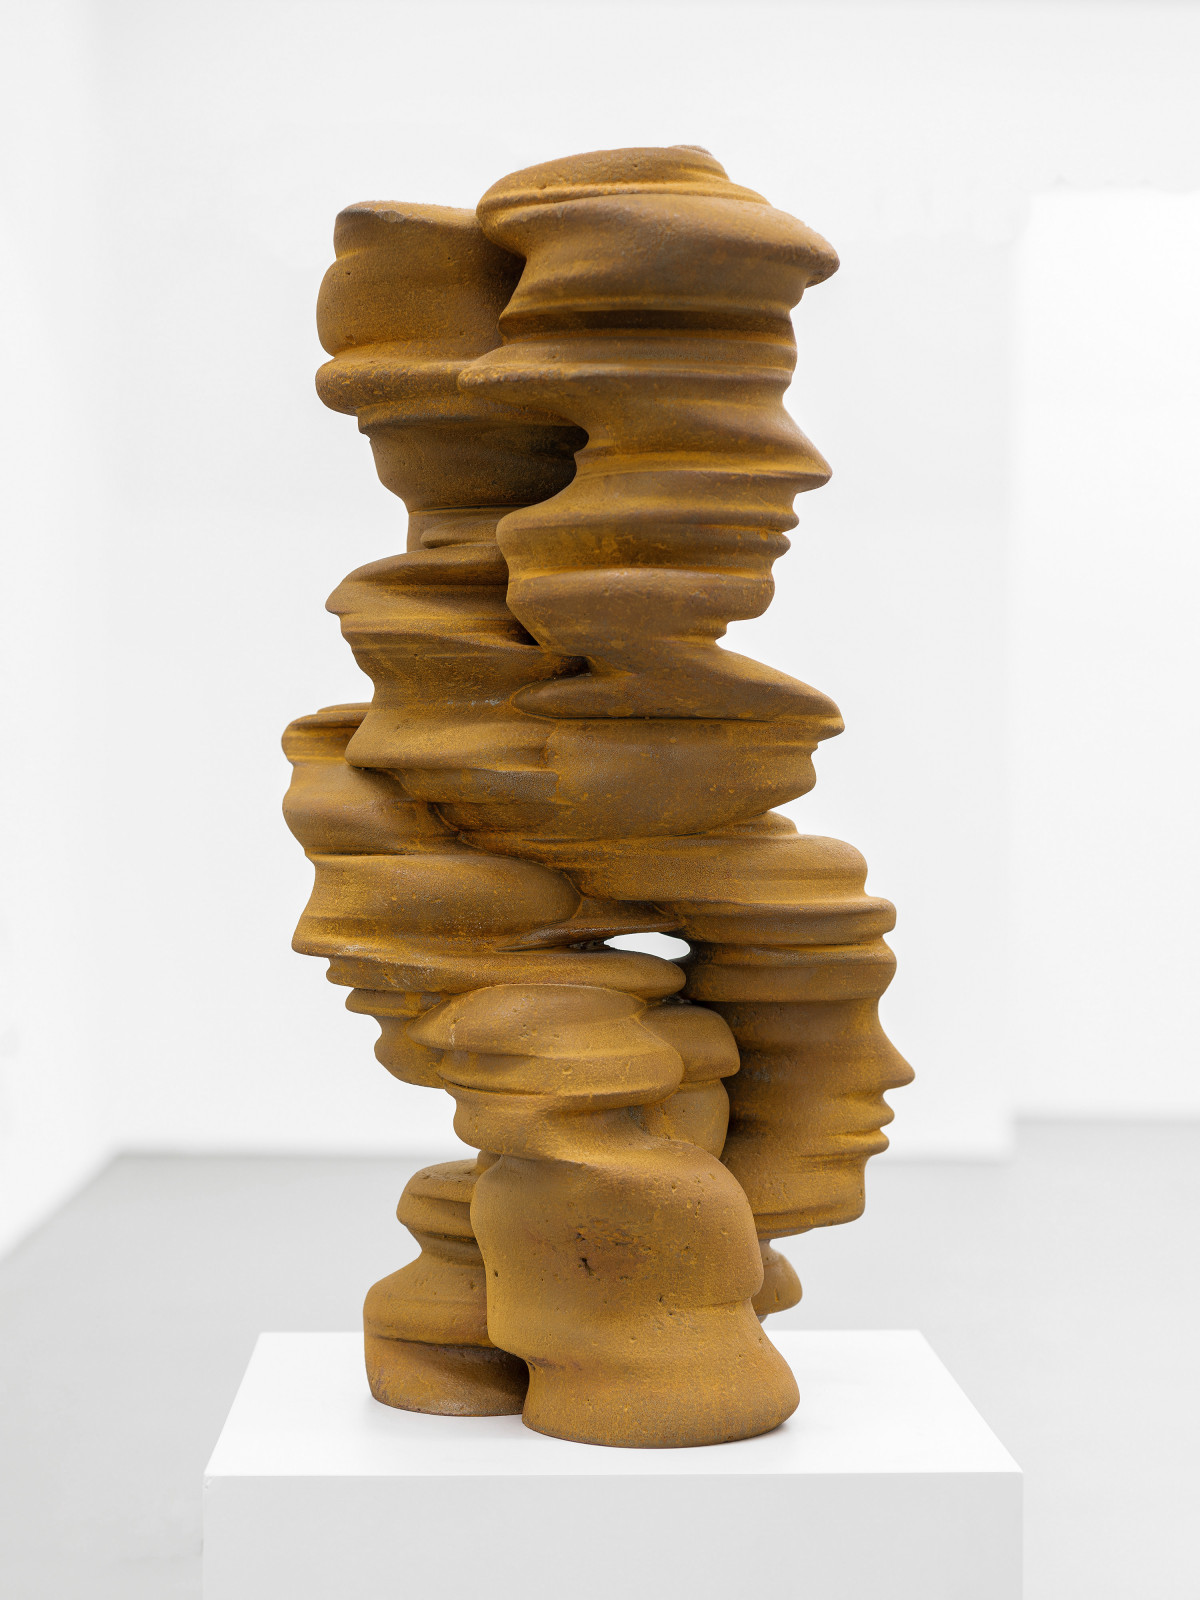 Tony Cragg, ‘Not yet titled’, 2010, Steel